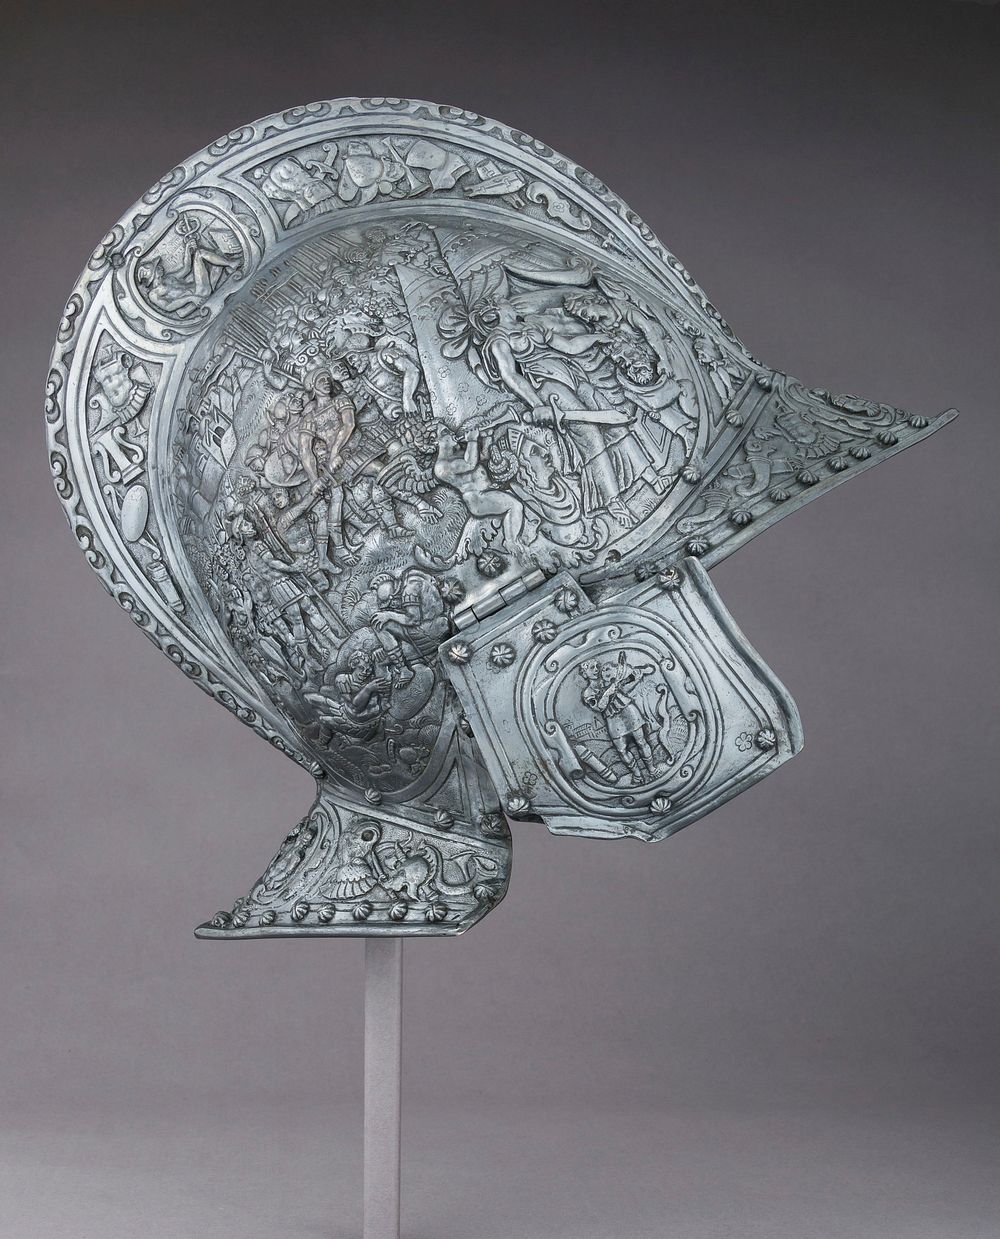 Electrotype Reproduction of a 16th Century Italian Helmet